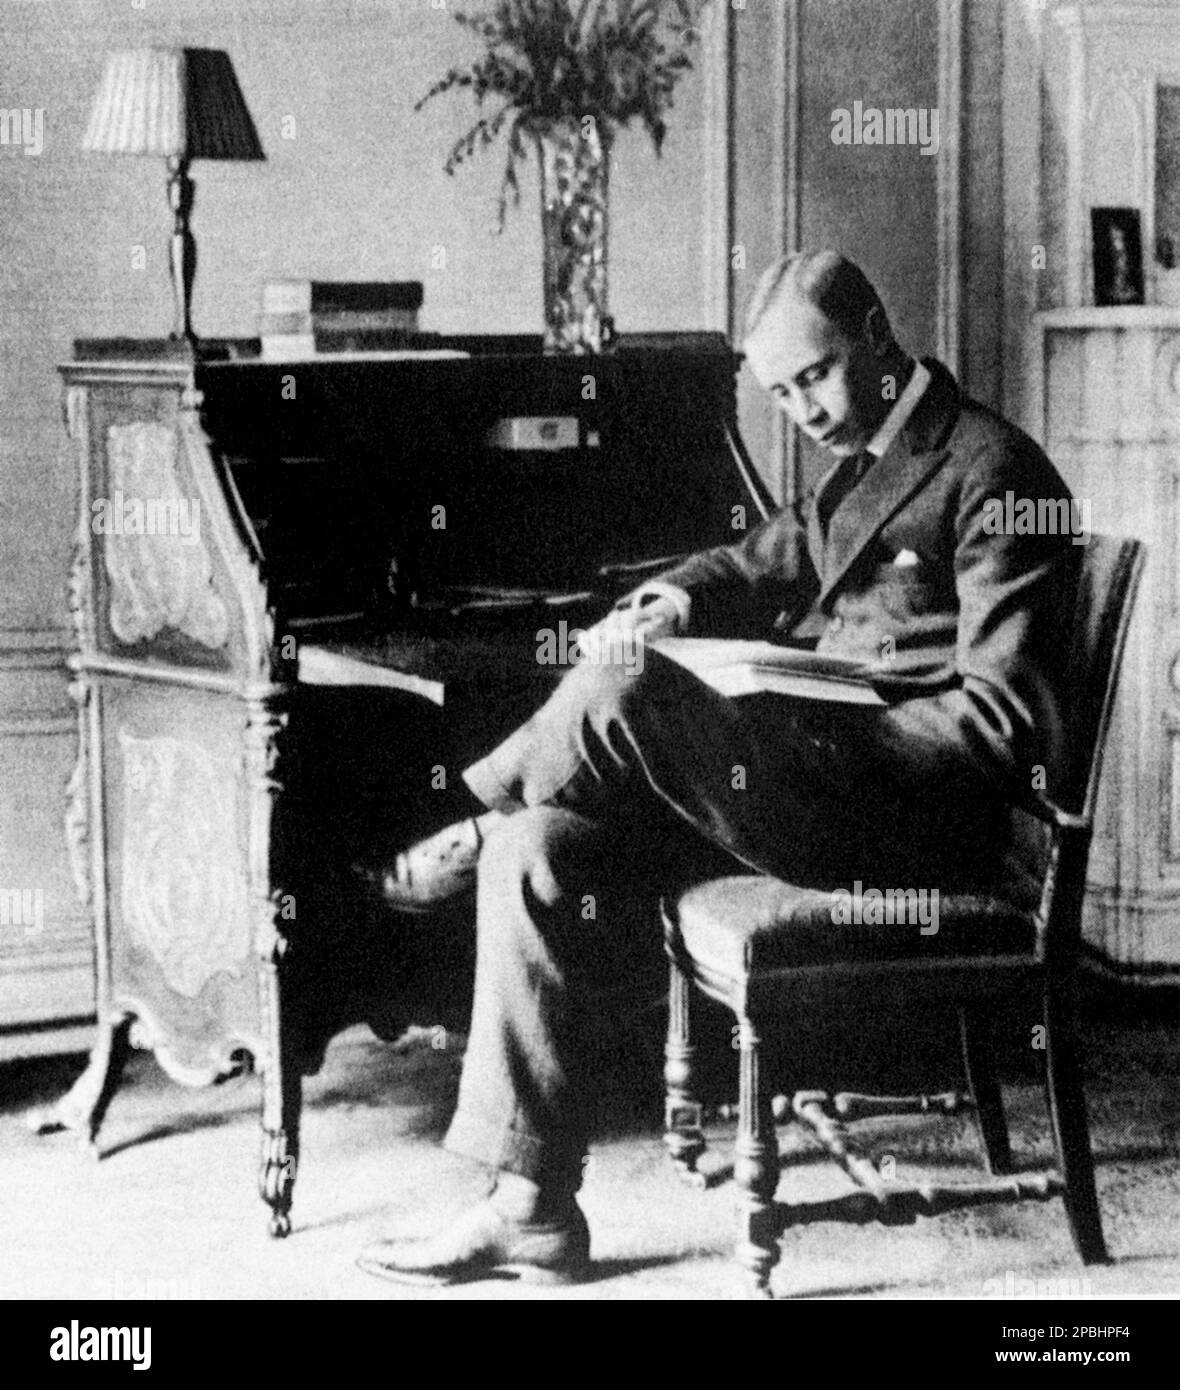 1919 : The russian music composer SERGEJ PROKOFIEV ( Sergej Sergeevic Prokof'ev,  1891 - 1953 ) , was a Russian composer who mastered numerous musical genres and came to be admired as one of the greatest composers of the 20th century - Sergej Sergejevic  Prokofjev , Sergei , Sergey or Serge  and Prokofief  Prokof'ev  Prokofiev  Prokoviev Prokofieff - BALLETS RUSSES by DIAGHILEV - Diagilev - COMPOSITORE - OPERA LIRICA - CLASSICA - CLASSICAL - PORTRAIT - RITRATTO - MUSICISTA - MUSICA  - pianist - pianista - AVANGUARDIA - AVANTGARDE - reader - lettore - desk - scrittoio - scrivania --- ARCHIVIO G Stock Photo